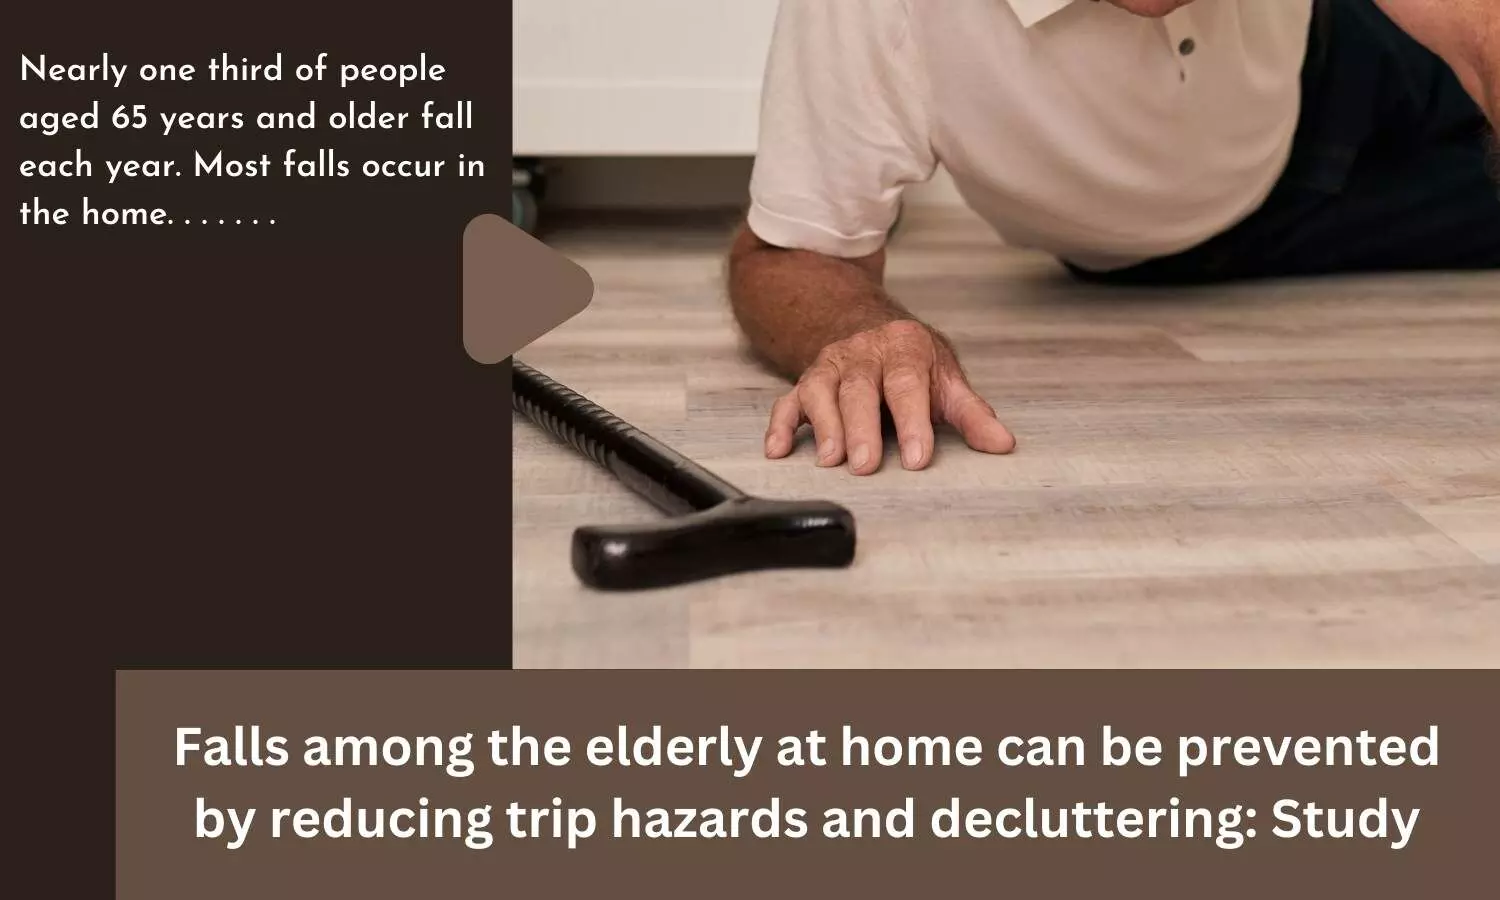 Falls among the elderly at home can be prevented by reducing trip hazards and decluttering: Study